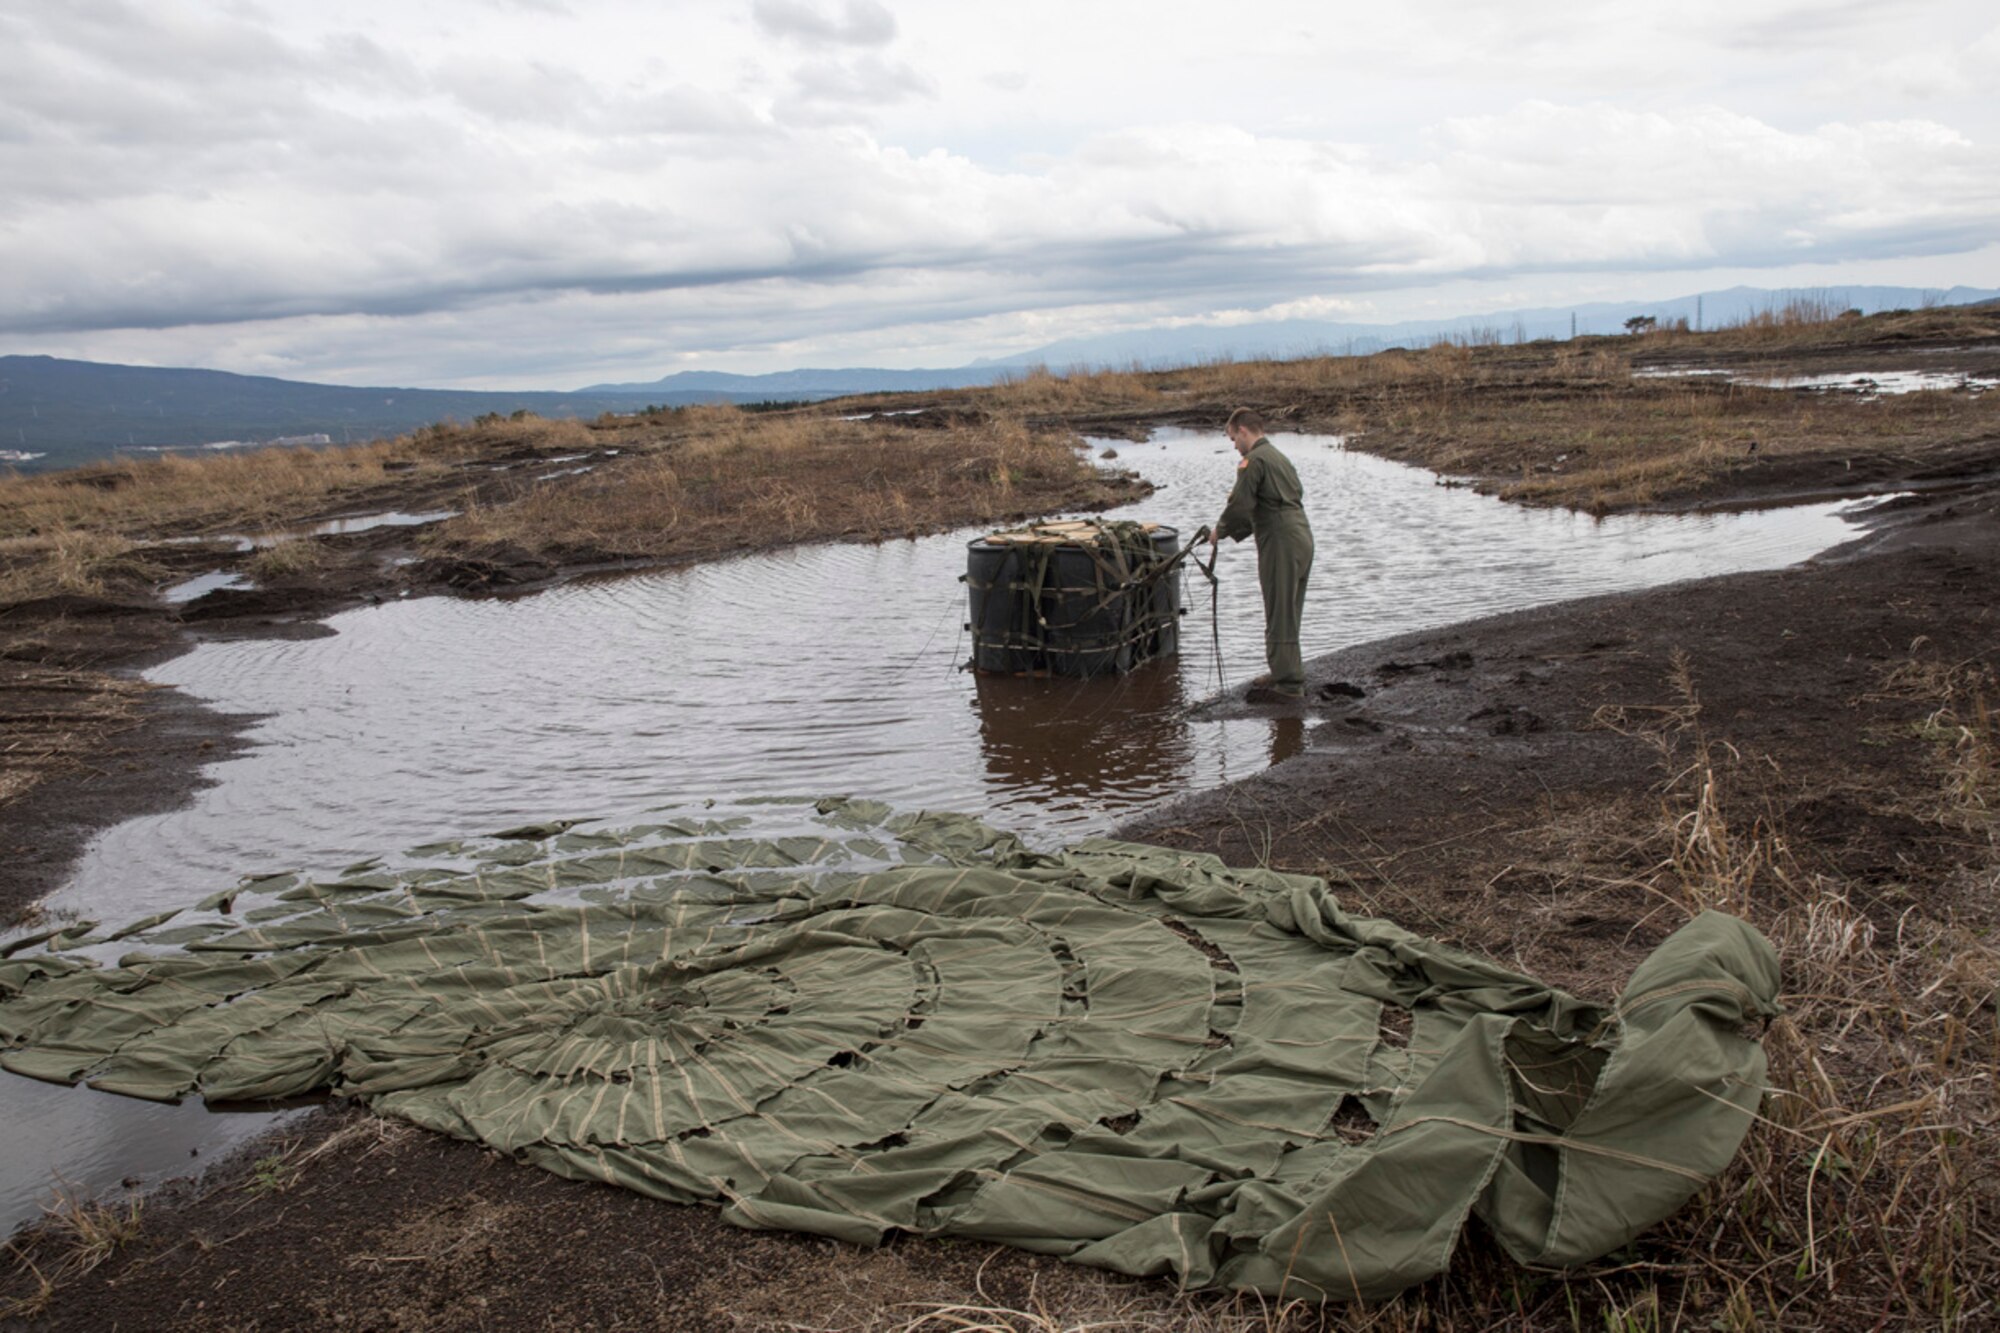 Airman 1st Class Stephen Clark, 36th Airlift Squadron C-130H loadmaster, recovers a containerized delivery system bundle from a water at Combined Armed Training Center Camp Fuji, Japan, April 12, 2017. Airmen with the 374th Logistics Readiness Squadron and Eagle airlifts with the 36th Airlift Squadron conducted mass CDS airdrop training. (U.S. Air Force photo by Yasuo Osakabe)